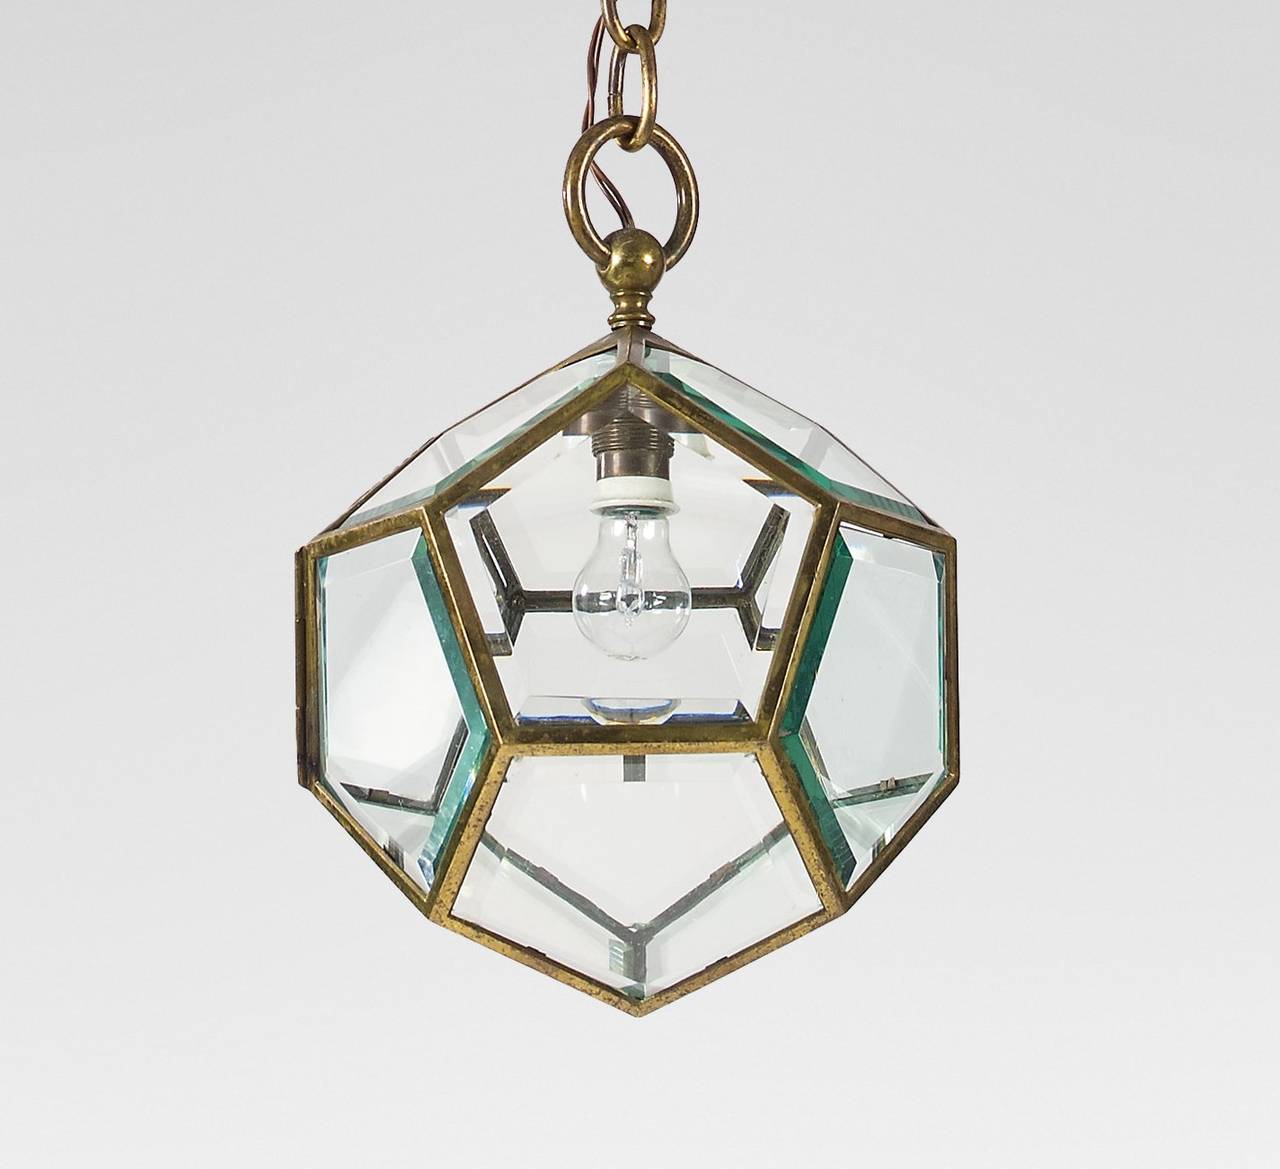 Hanging Lamp, design around 1905
Manufactured by Friedrich Otto Schmidt, Vienna
Brass, glass with facets, newly electrified
A bigger model was used by Adolf Loos for the interior decoration of the Paris branch of the Viennese tailor Knize.
L 126